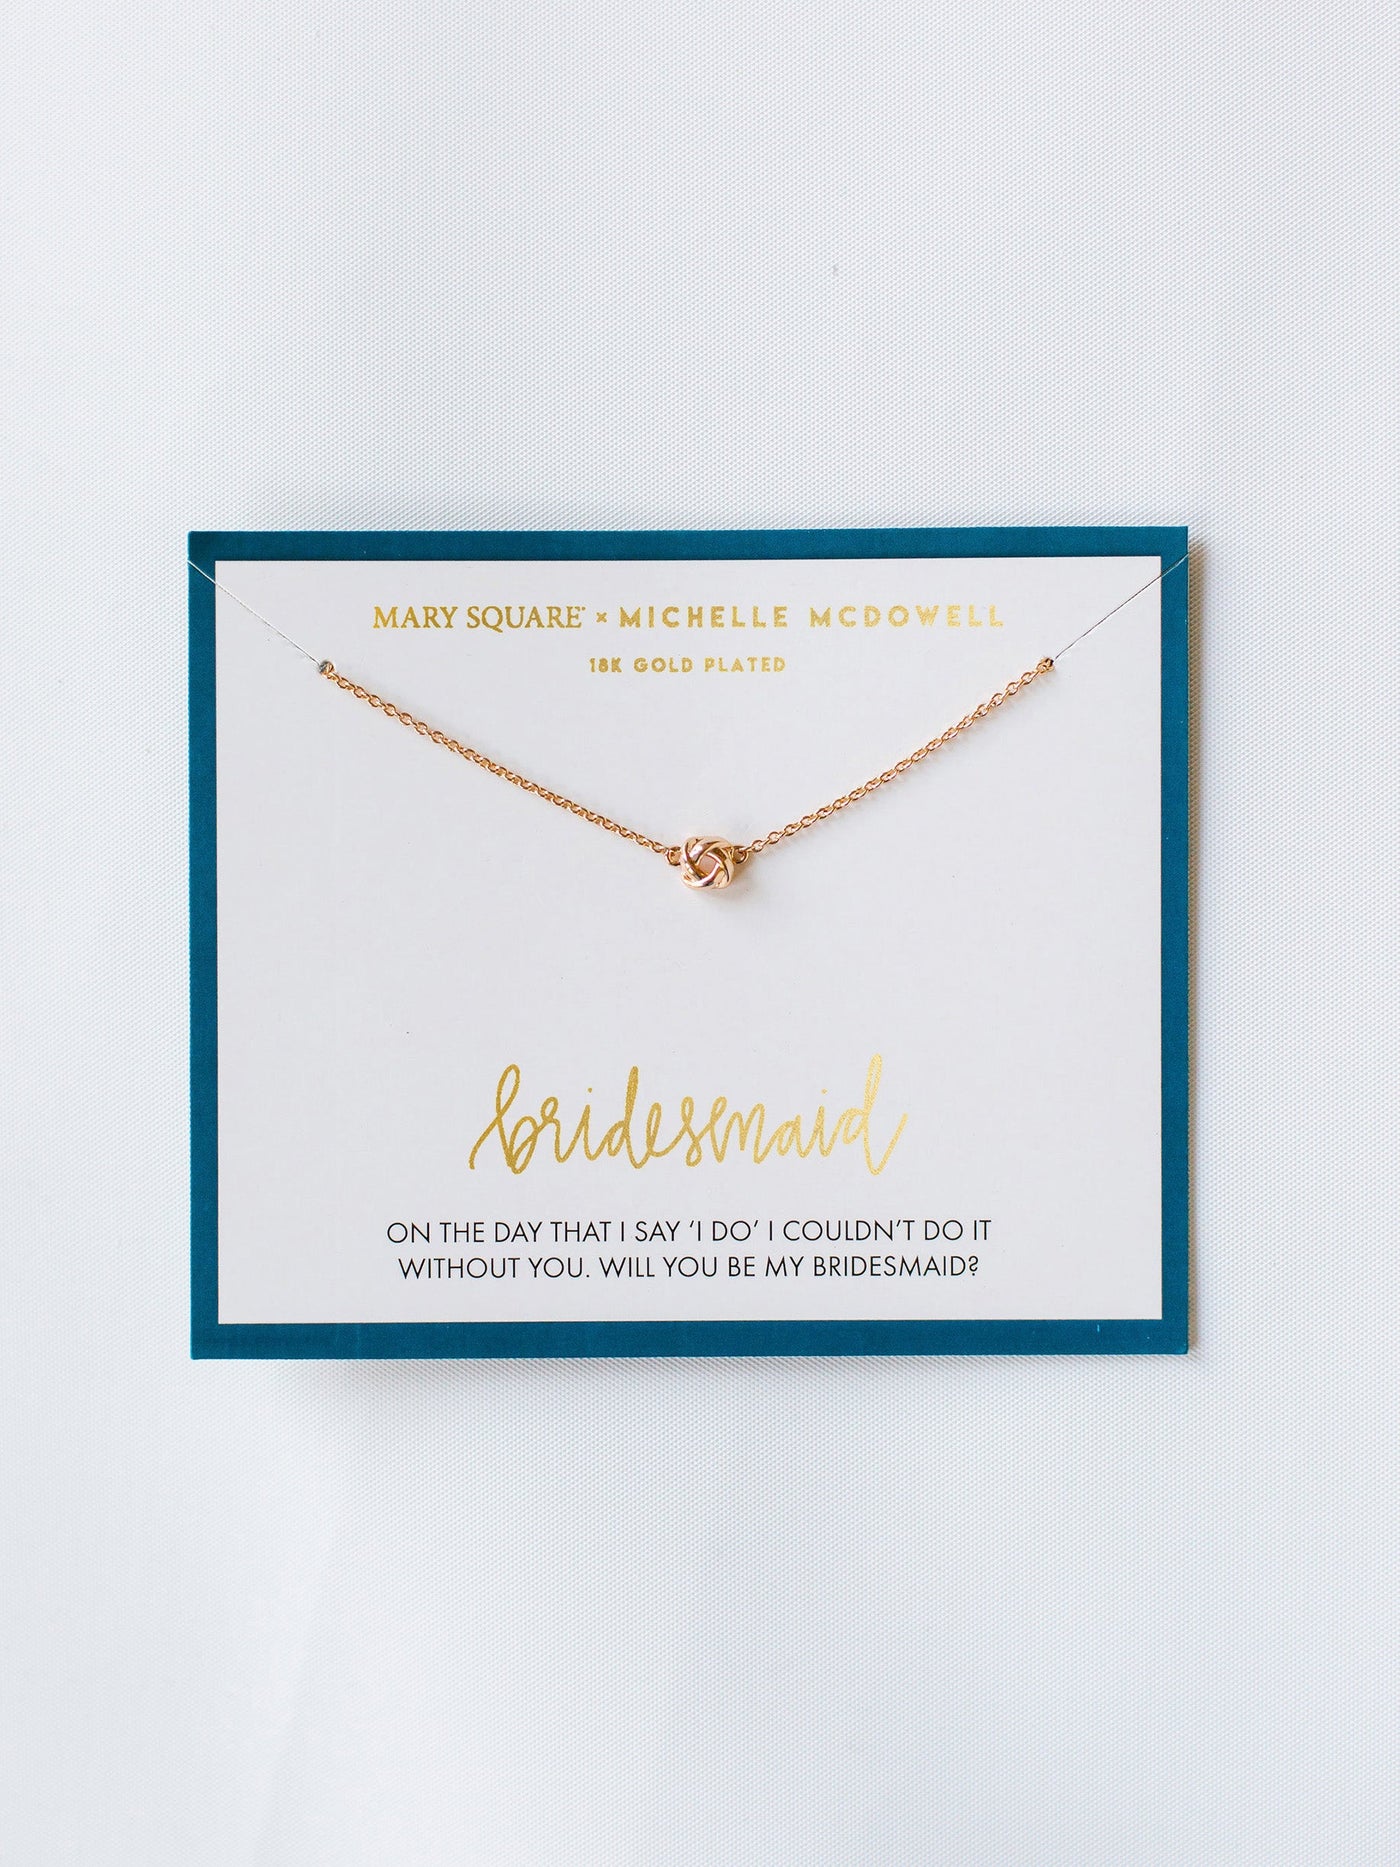 Bridesmaid Necklace - Mary Square, LLC